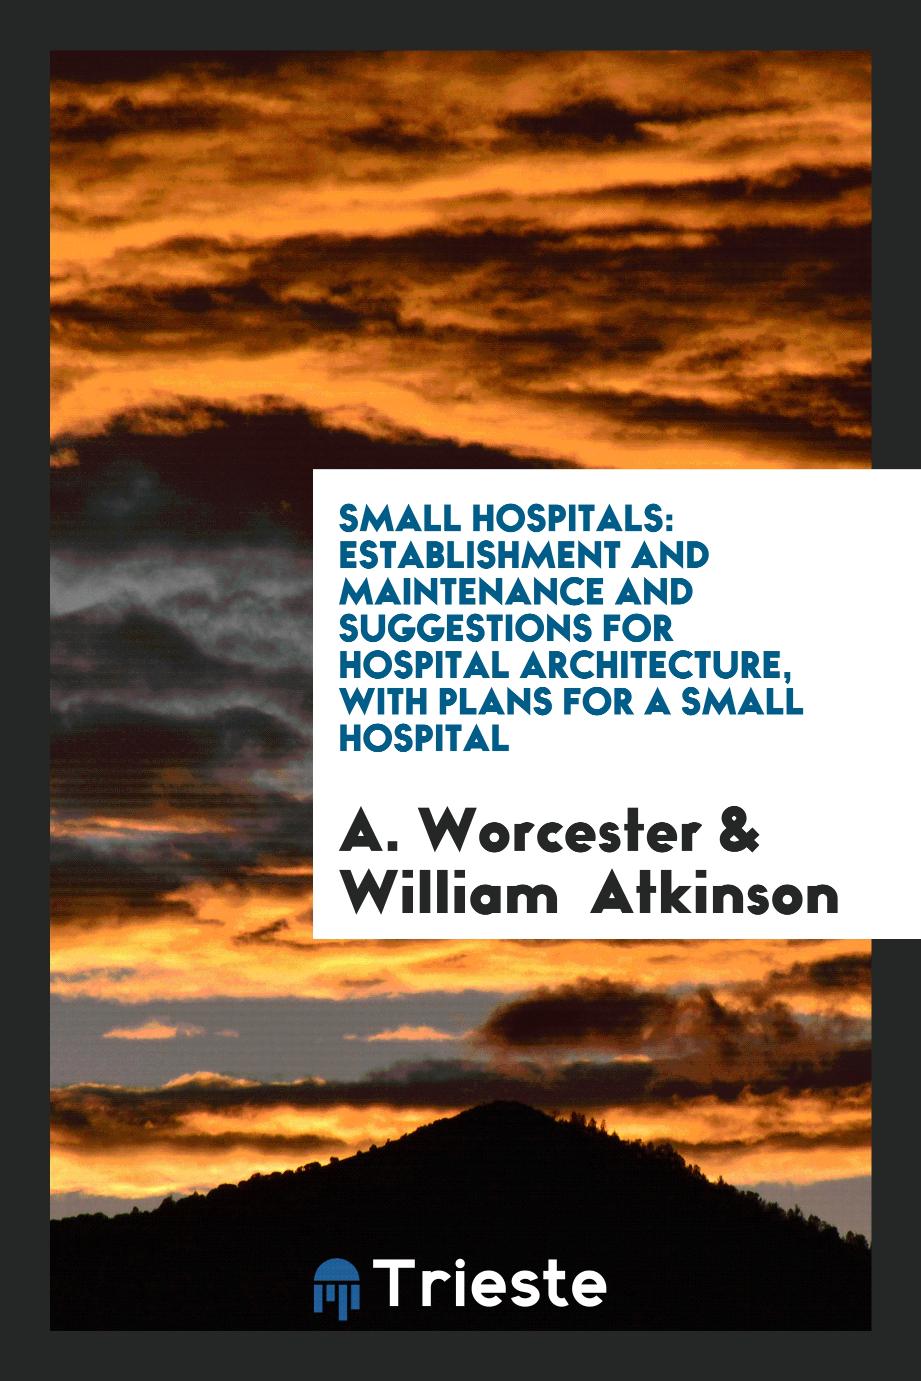 Small Hospitals: Establishment and Maintenance and Suggestions for Hospital Architecture, with Plans for a Small Hospital